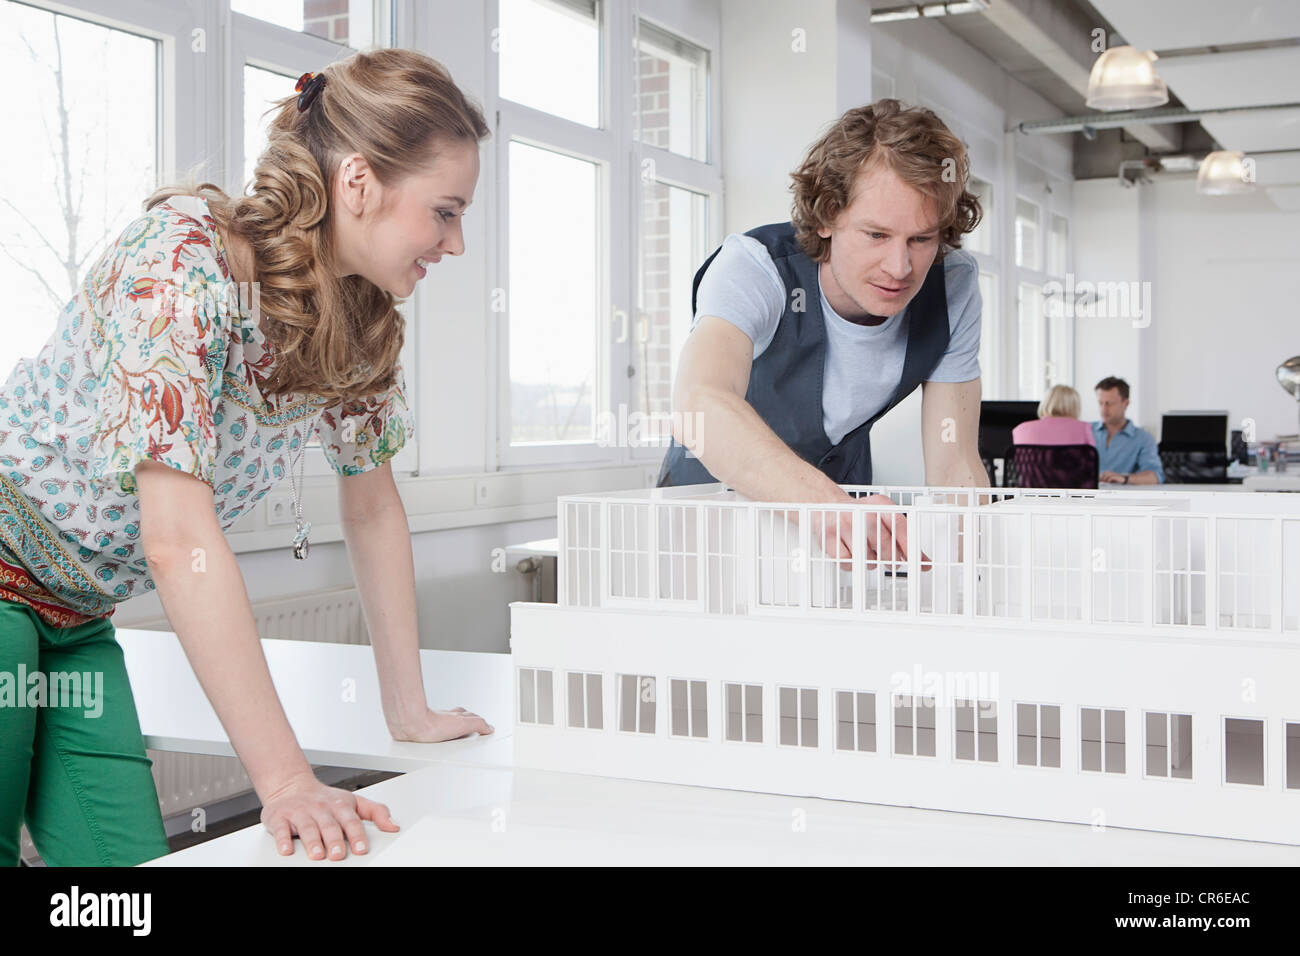 Germany, Bavaria, Munich, Architects looking at architectural model, colleagues working in background Stock Photo